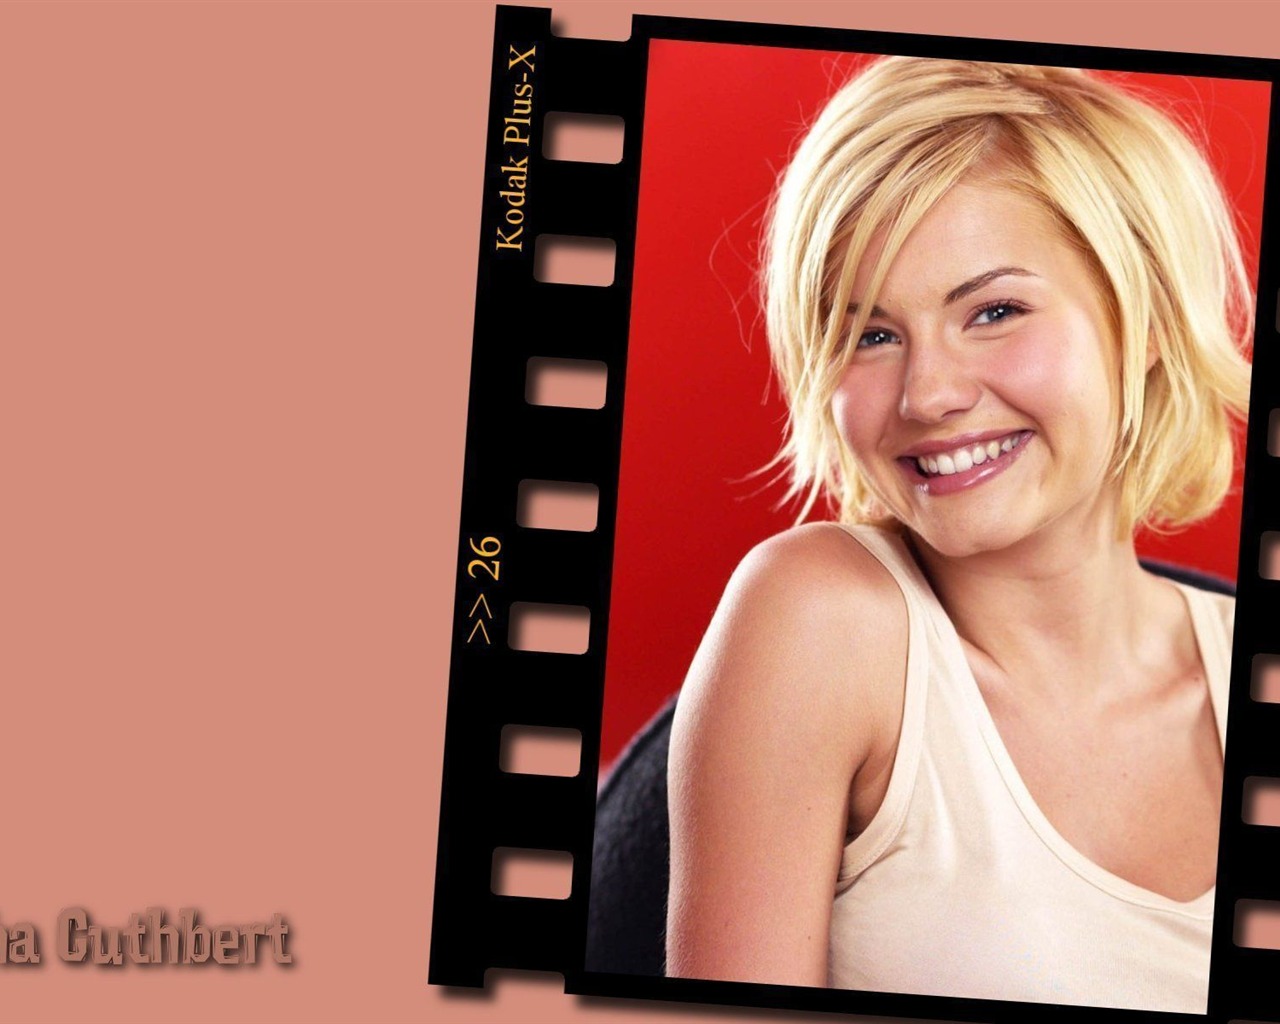 Elisha Cuthbert #014 - 1280x1024 Wallpapers Pictures Photos Images